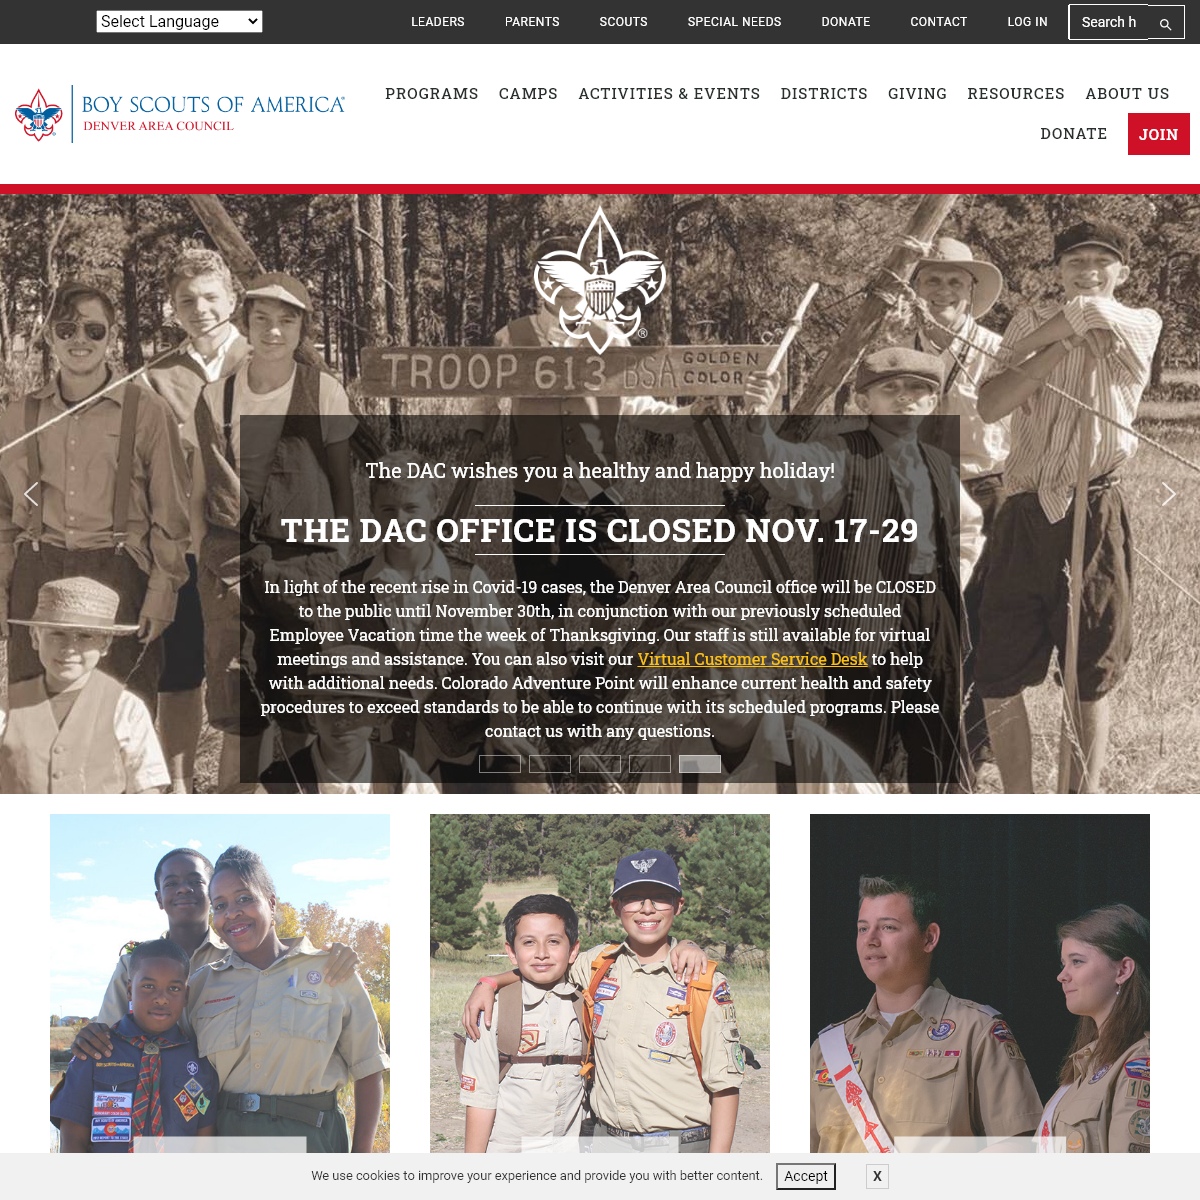 A complete backup of denverboyscouts.org